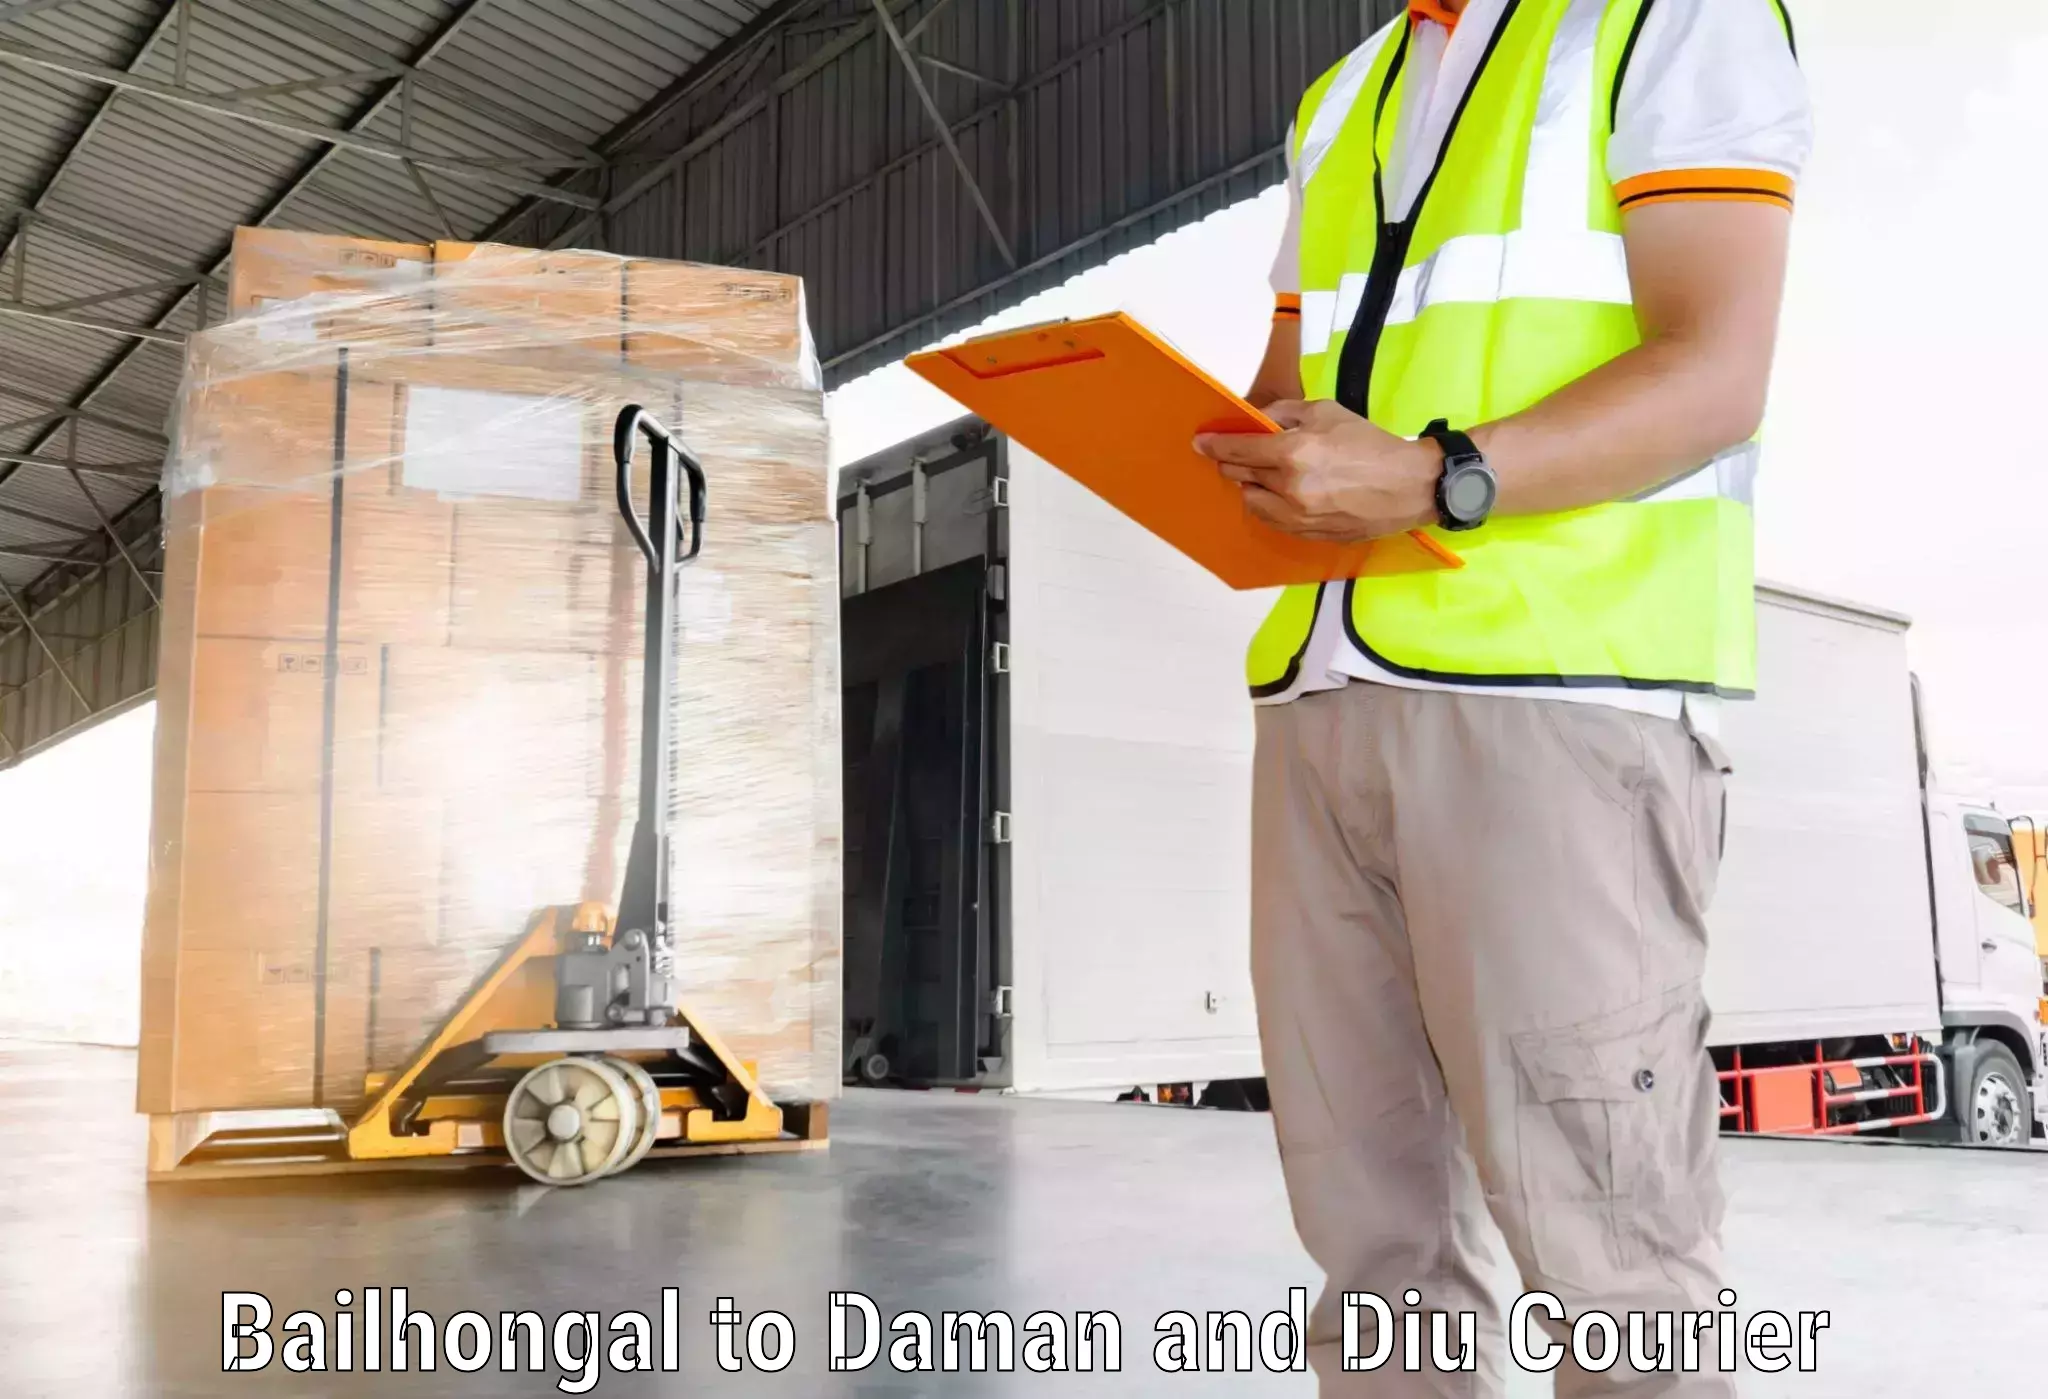 Reliable courier service Bailhongal to Daman